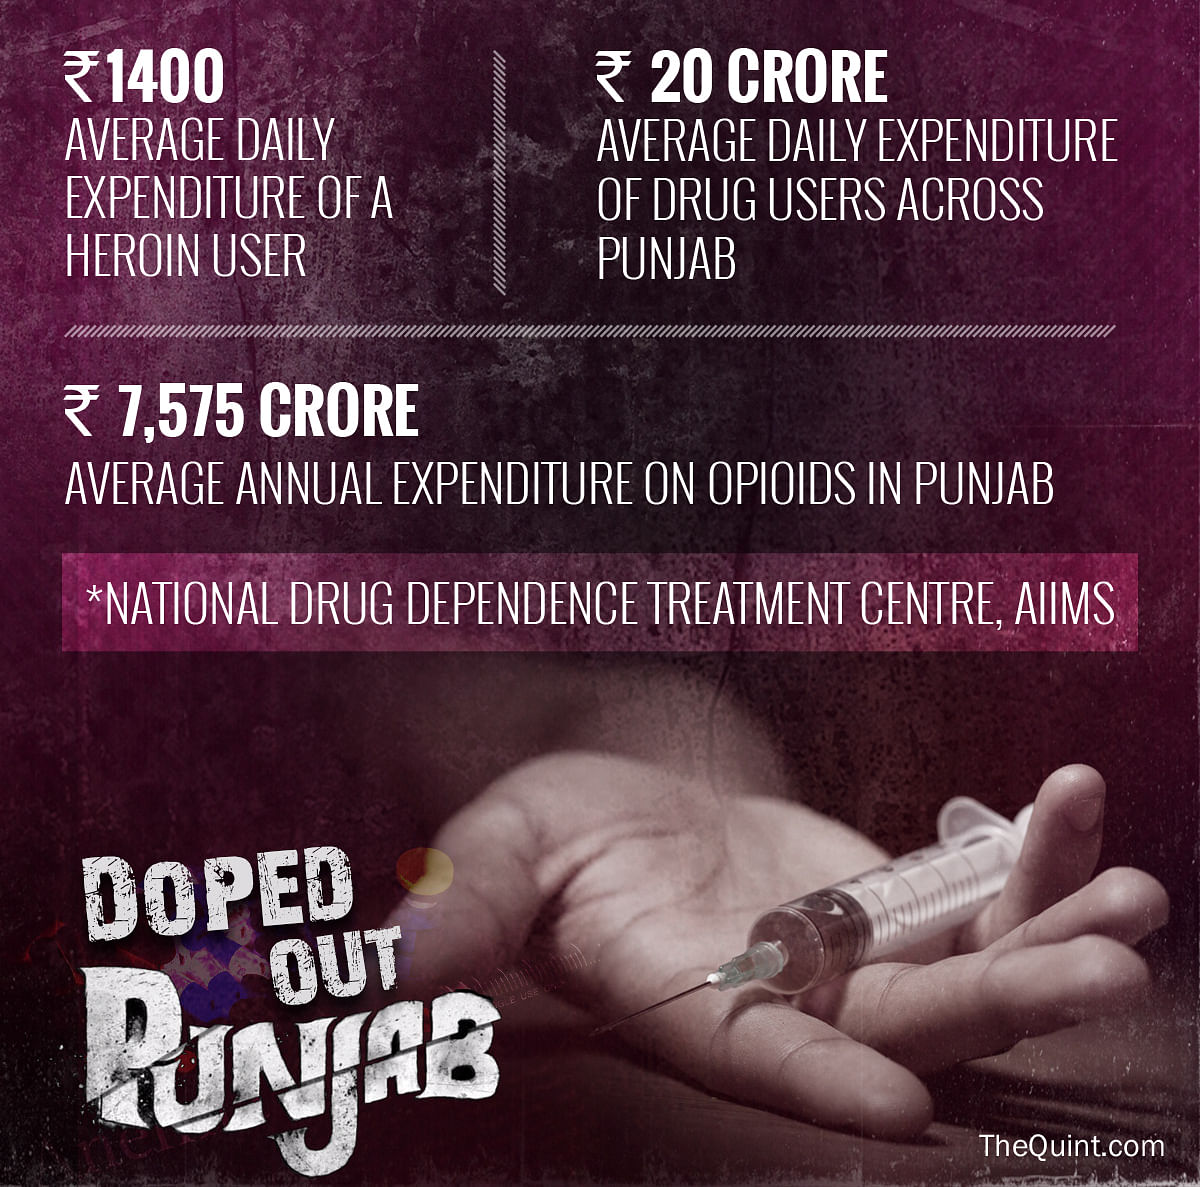 Shocking statistics that prove that “excessive swearing” is the appropriate response to Punjab’s drug problem.